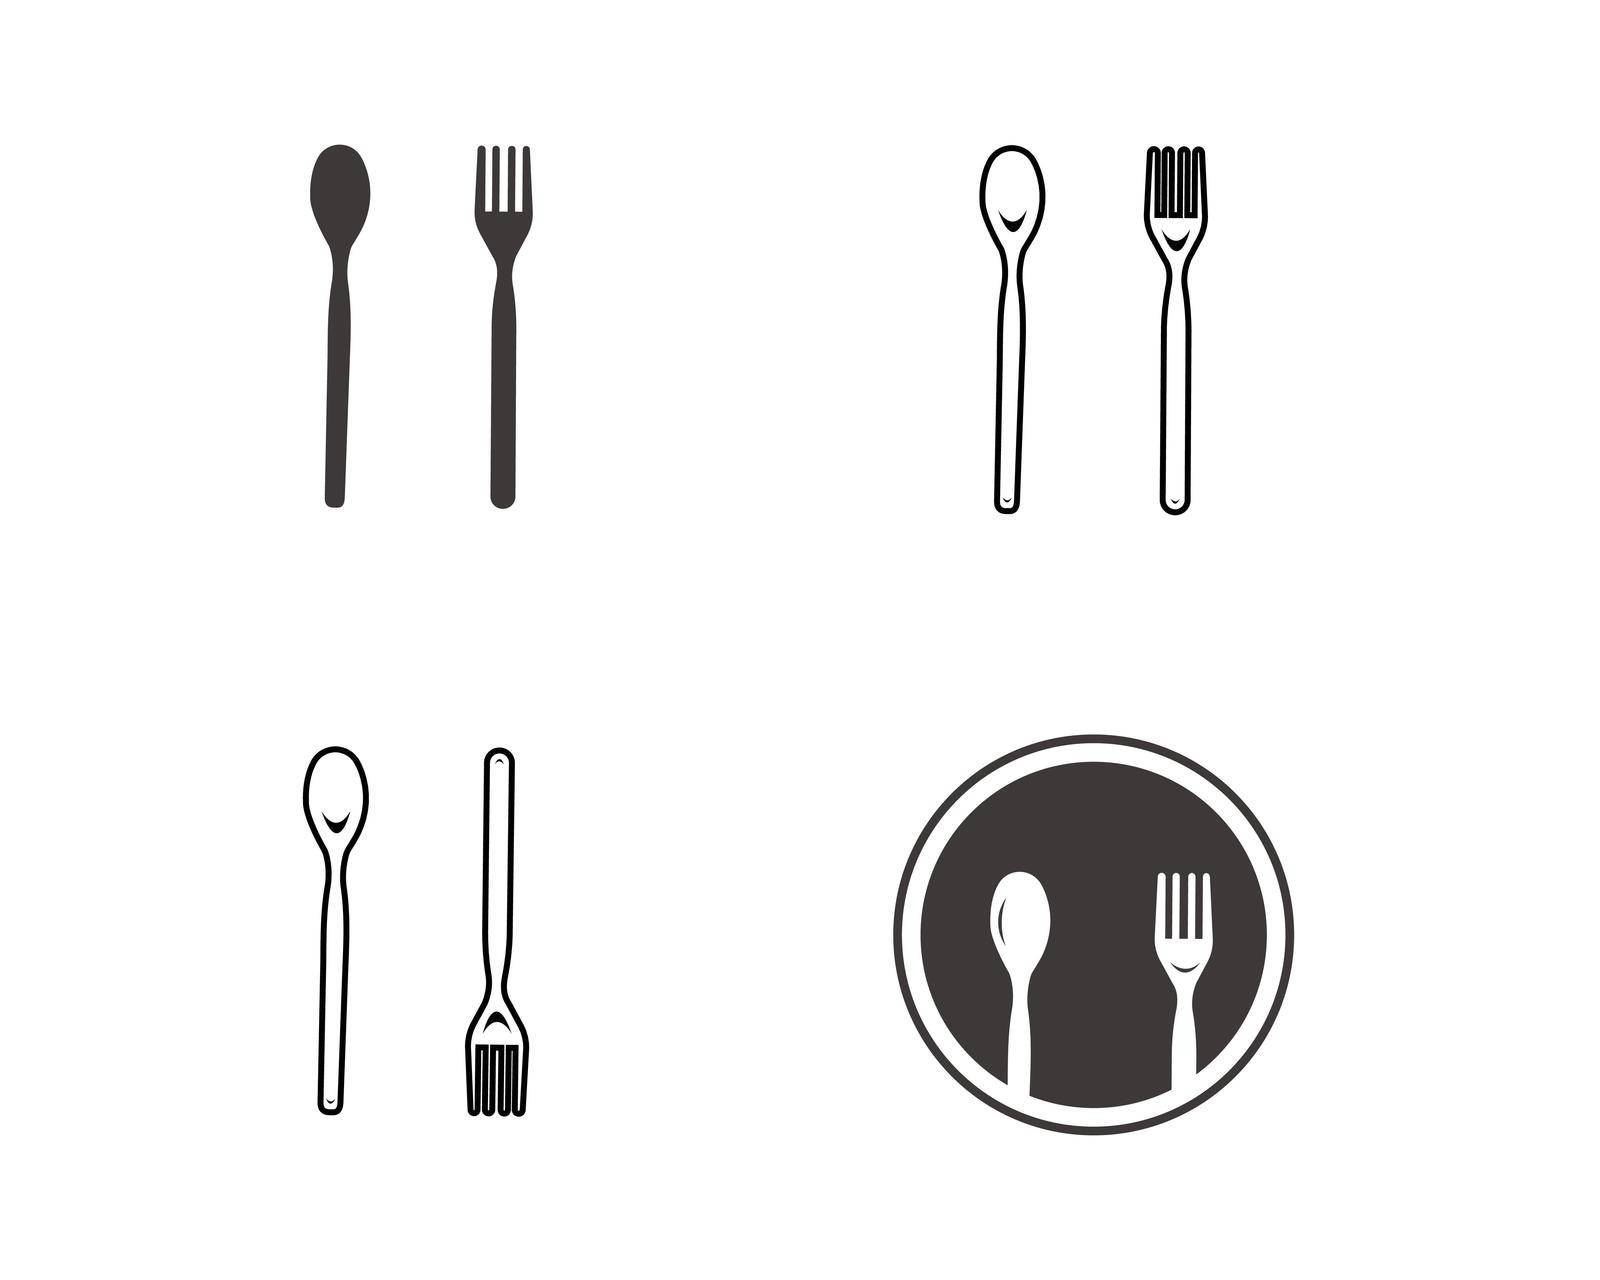 Abstract logo of a cafe or restaurant. A spoon, knife and fork on a plate. A simple outline